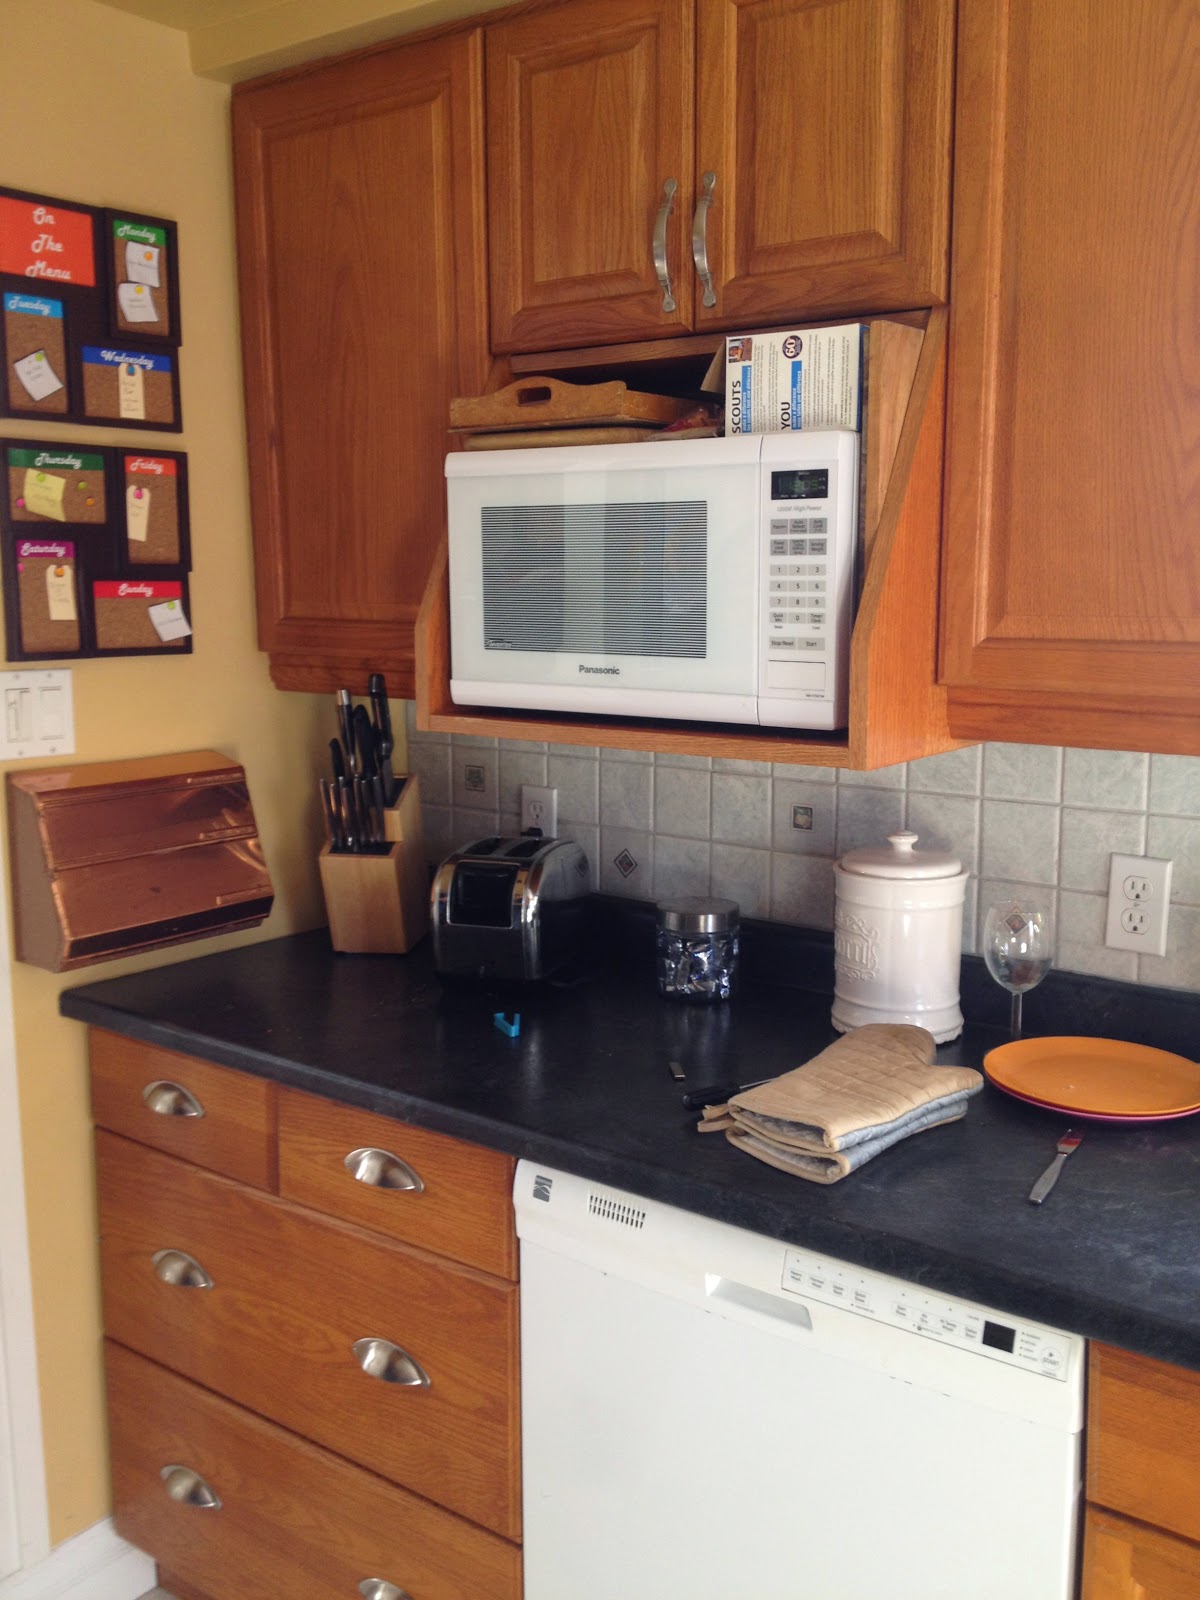 How to Cut a for Over the Range Microwave (Our Budget Kitchen Update) Frugal Family Times